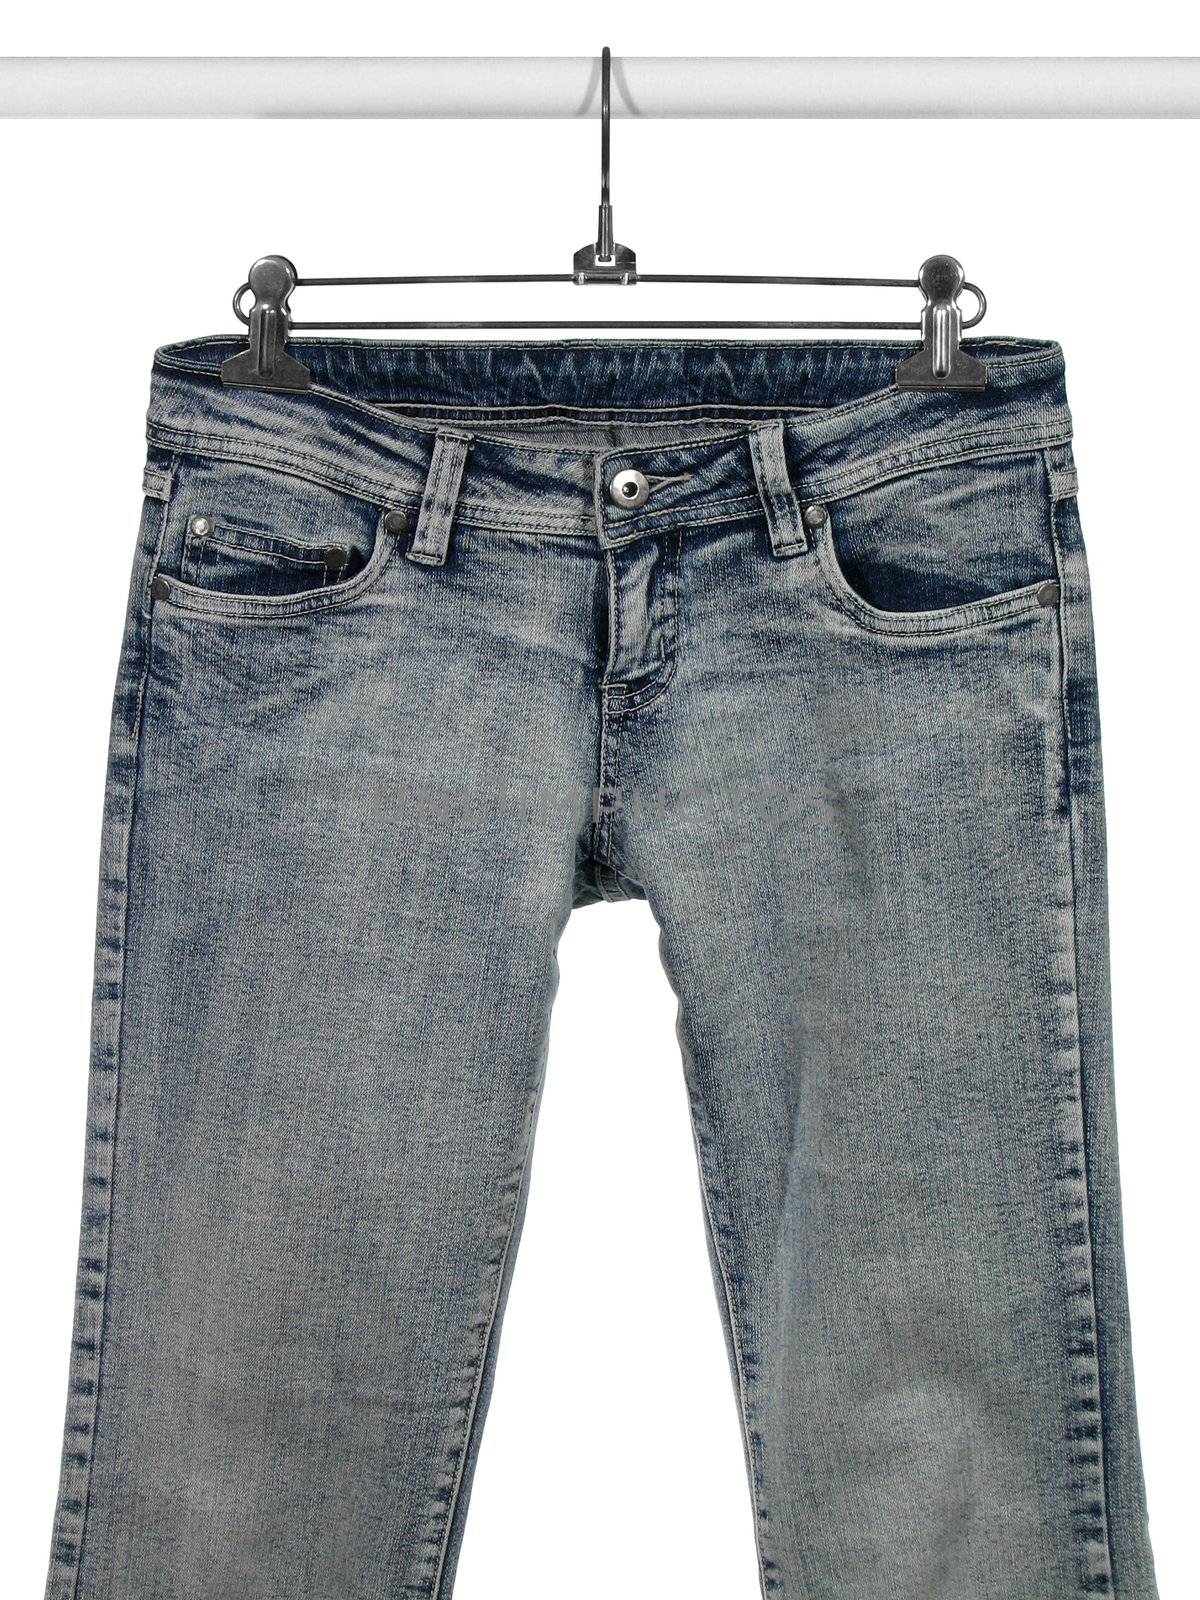 Closeup of blue jeans hanging on a rack. Isolated on white background.